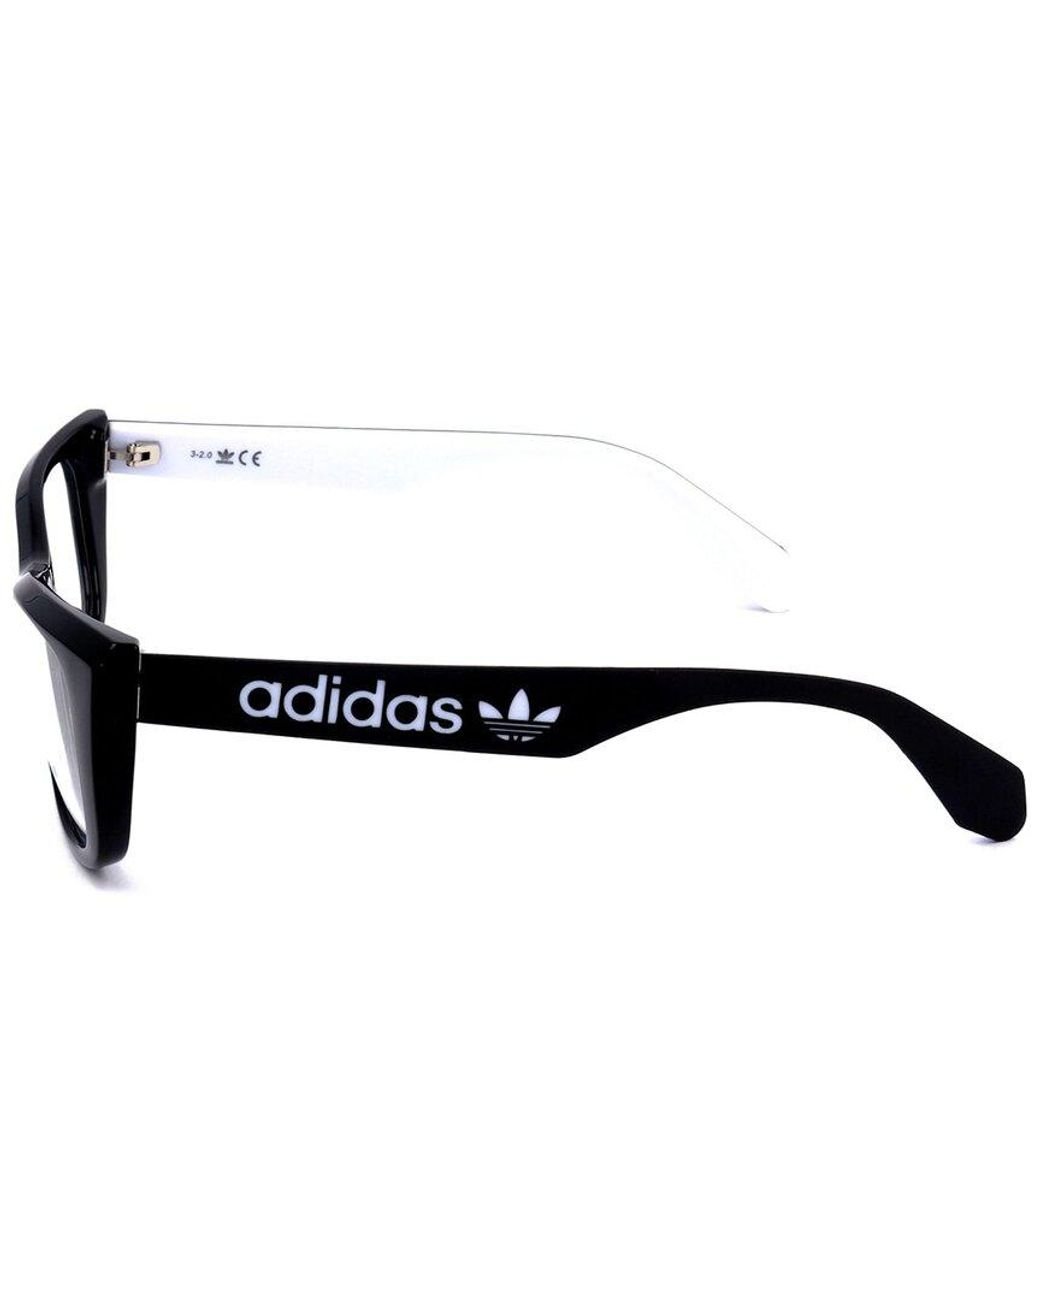 adidas Or5010 55mm Optical Frames in Brown | Lyst